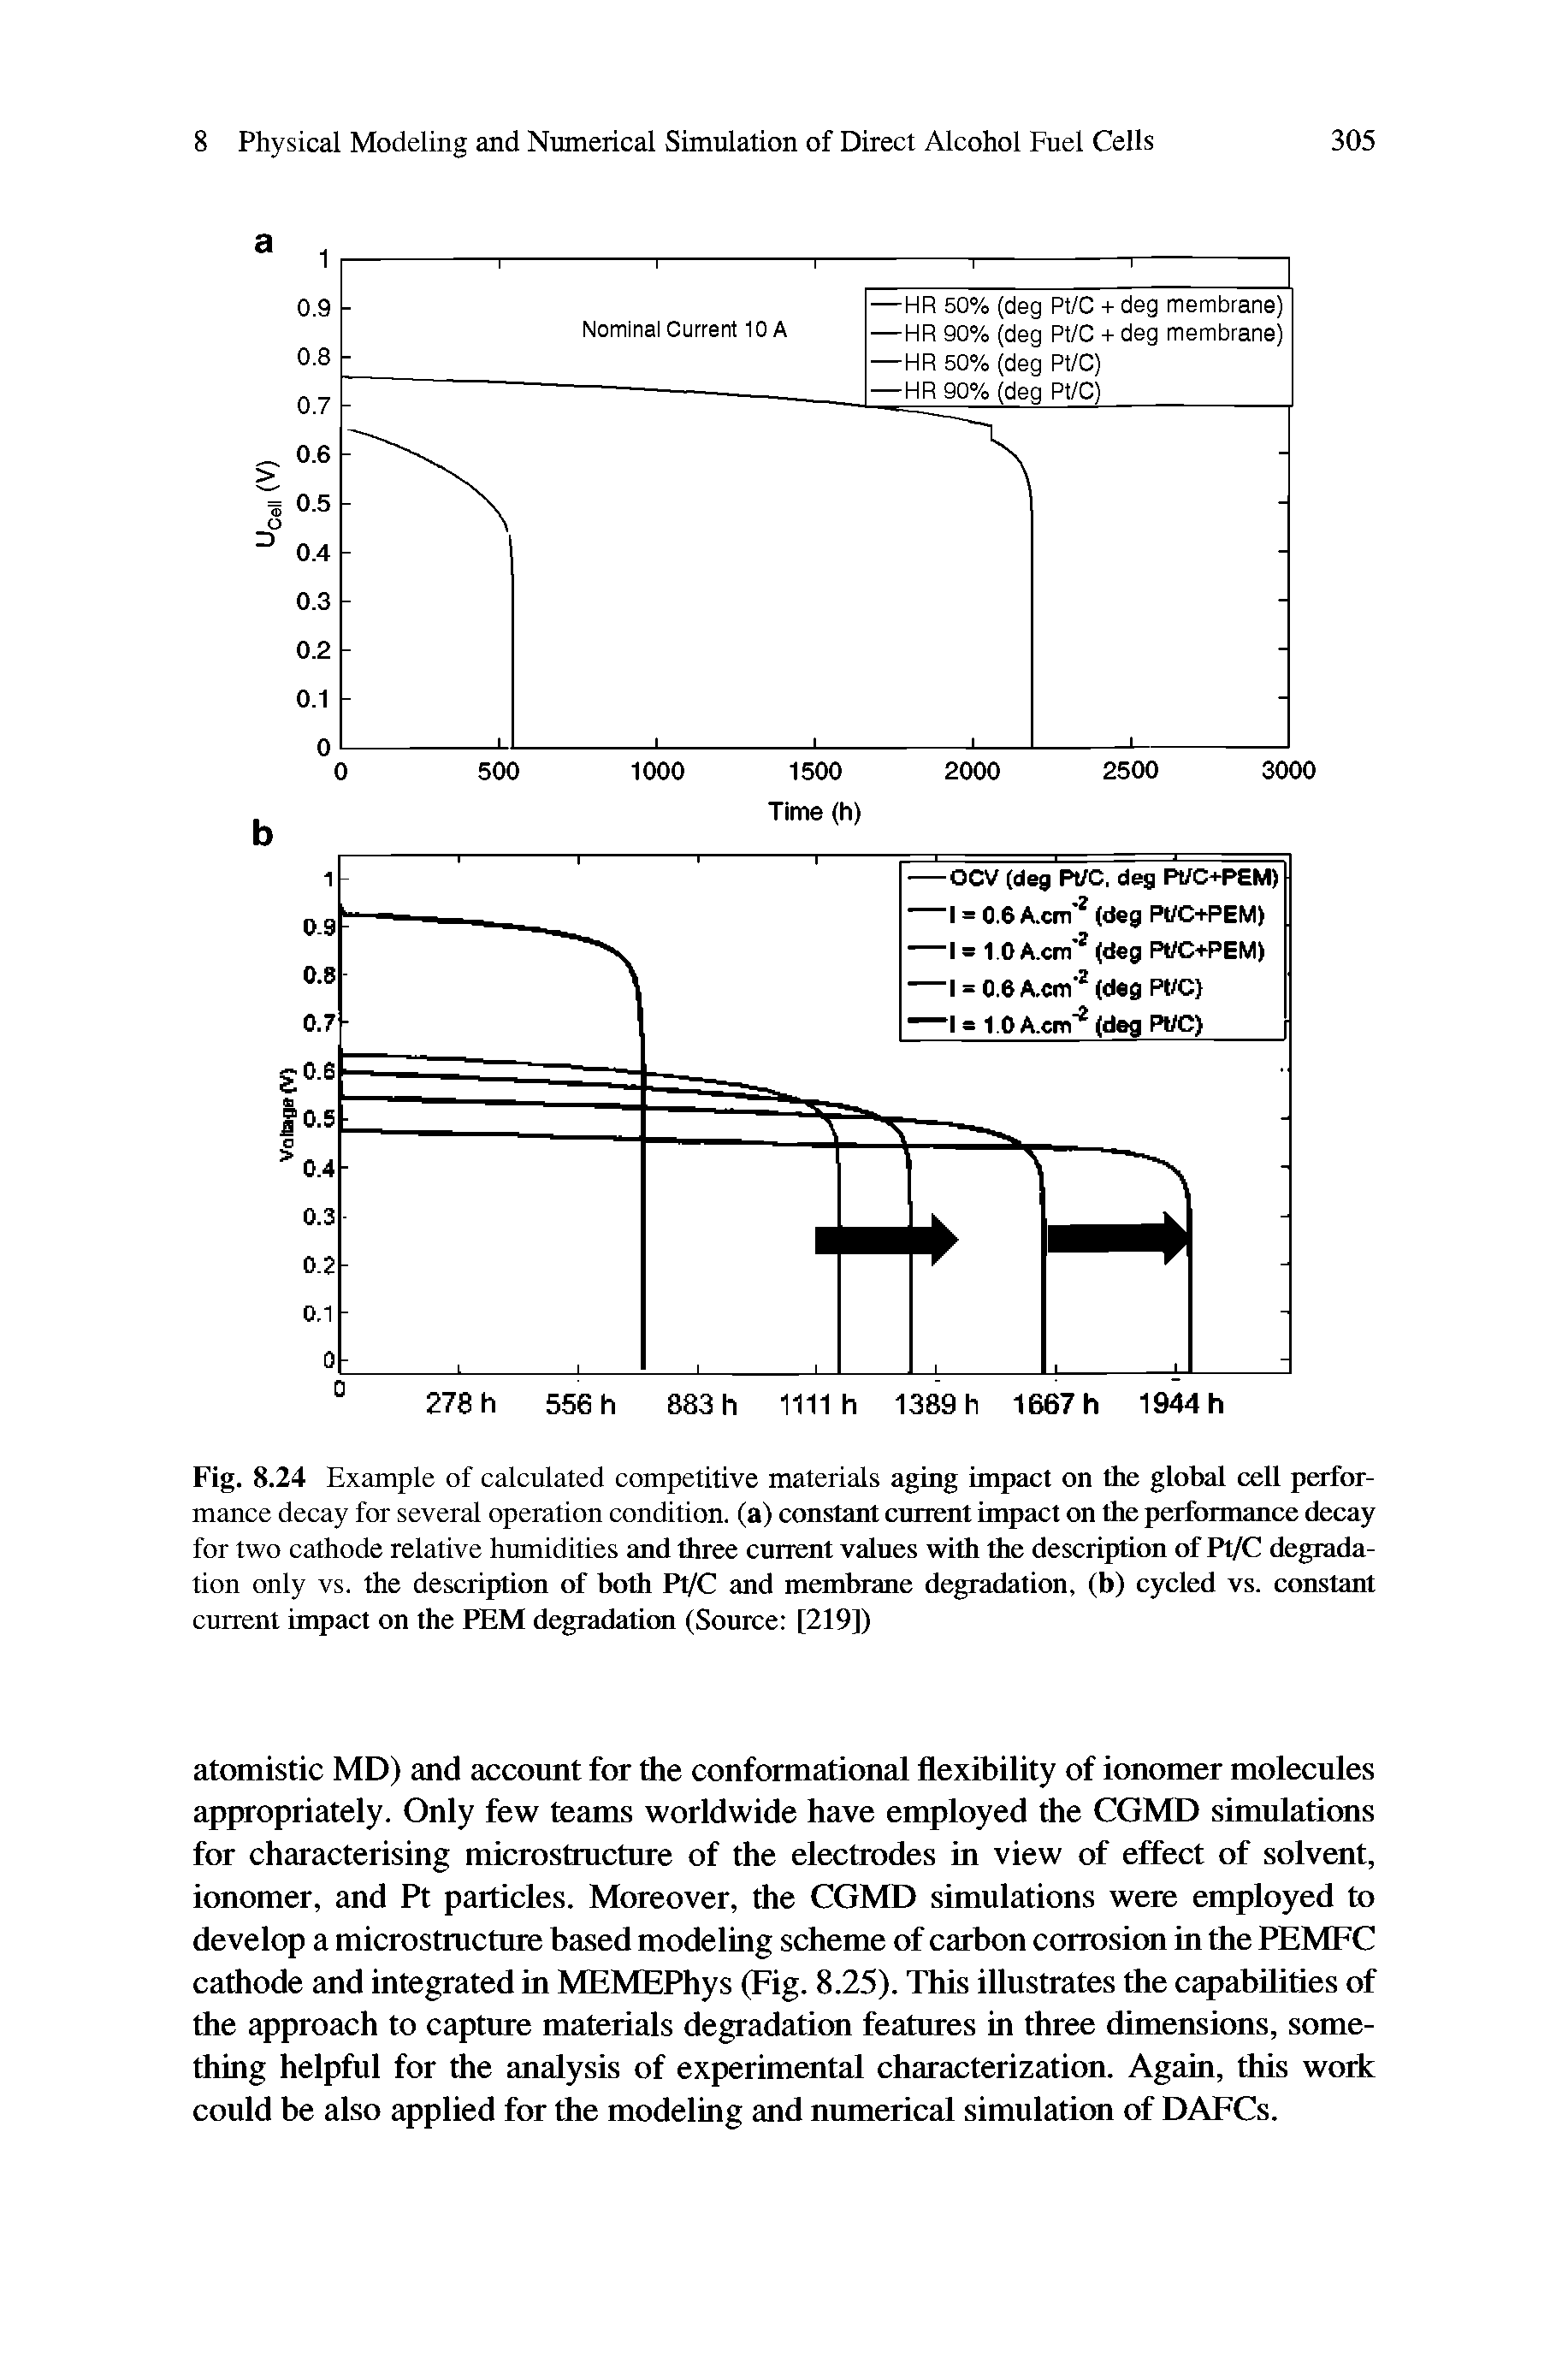 Fig. 8.24 Example of calculated competitive materials aging impact on the global cell performance decay for several operation condition, (a) constant cnnent impact on the performance decay for two cathode relative humidities and three current values with the description of Pt/C degradation only vs. the description of both Pl/C and membrane degradation, (b) cycled vs. constant current impact on the PEM degradatimi (Source [219])...